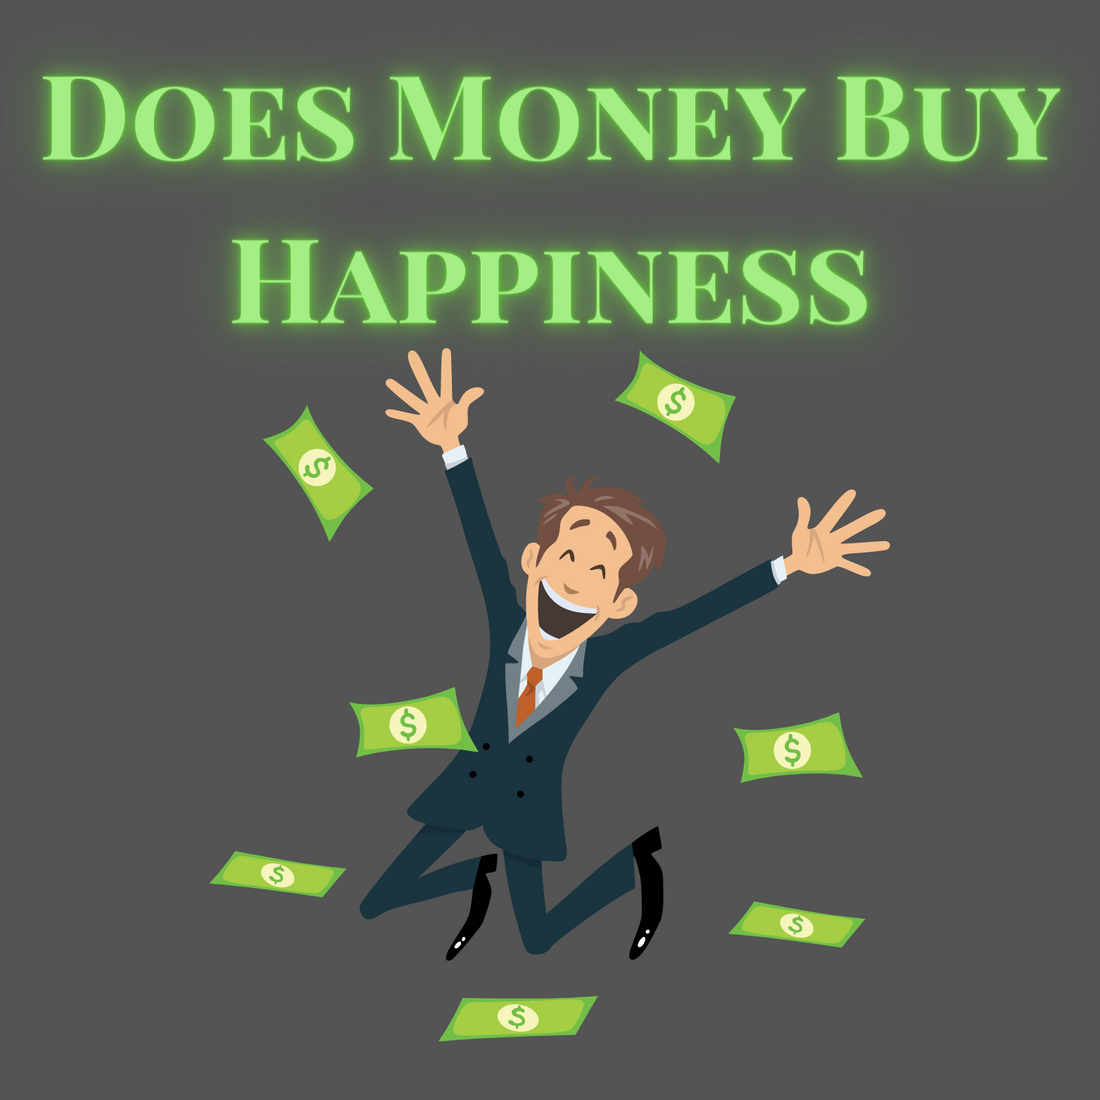 Does Money Buy Happiness?